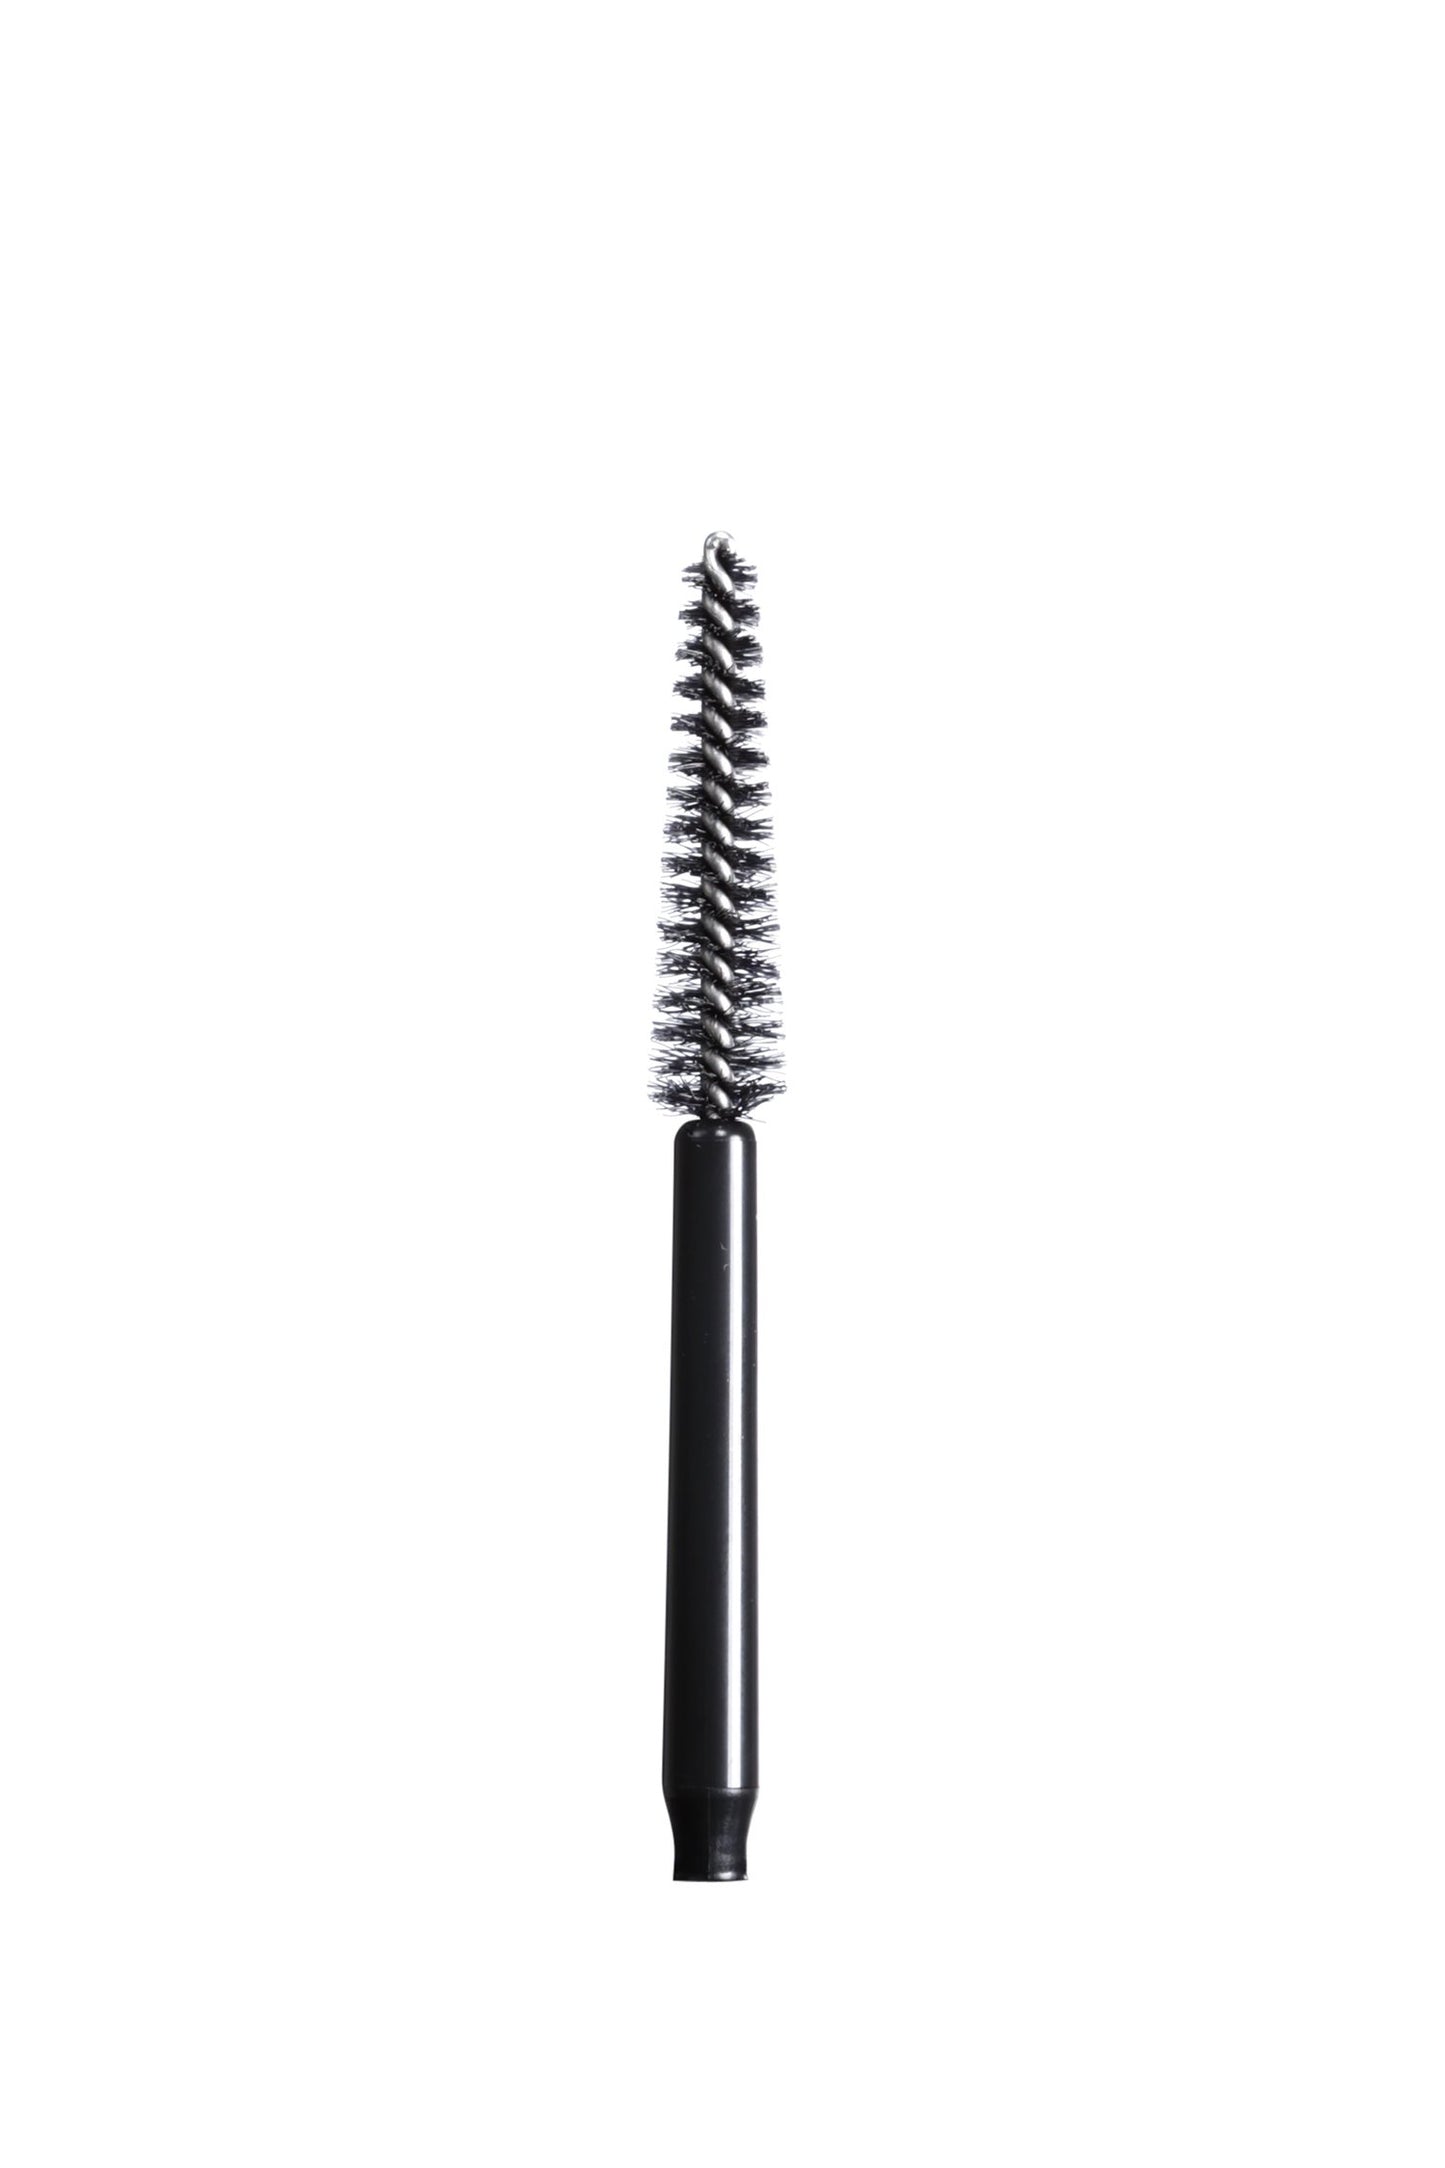 Pine Tree-shaped applicator to easily reach both the root and base of lashes